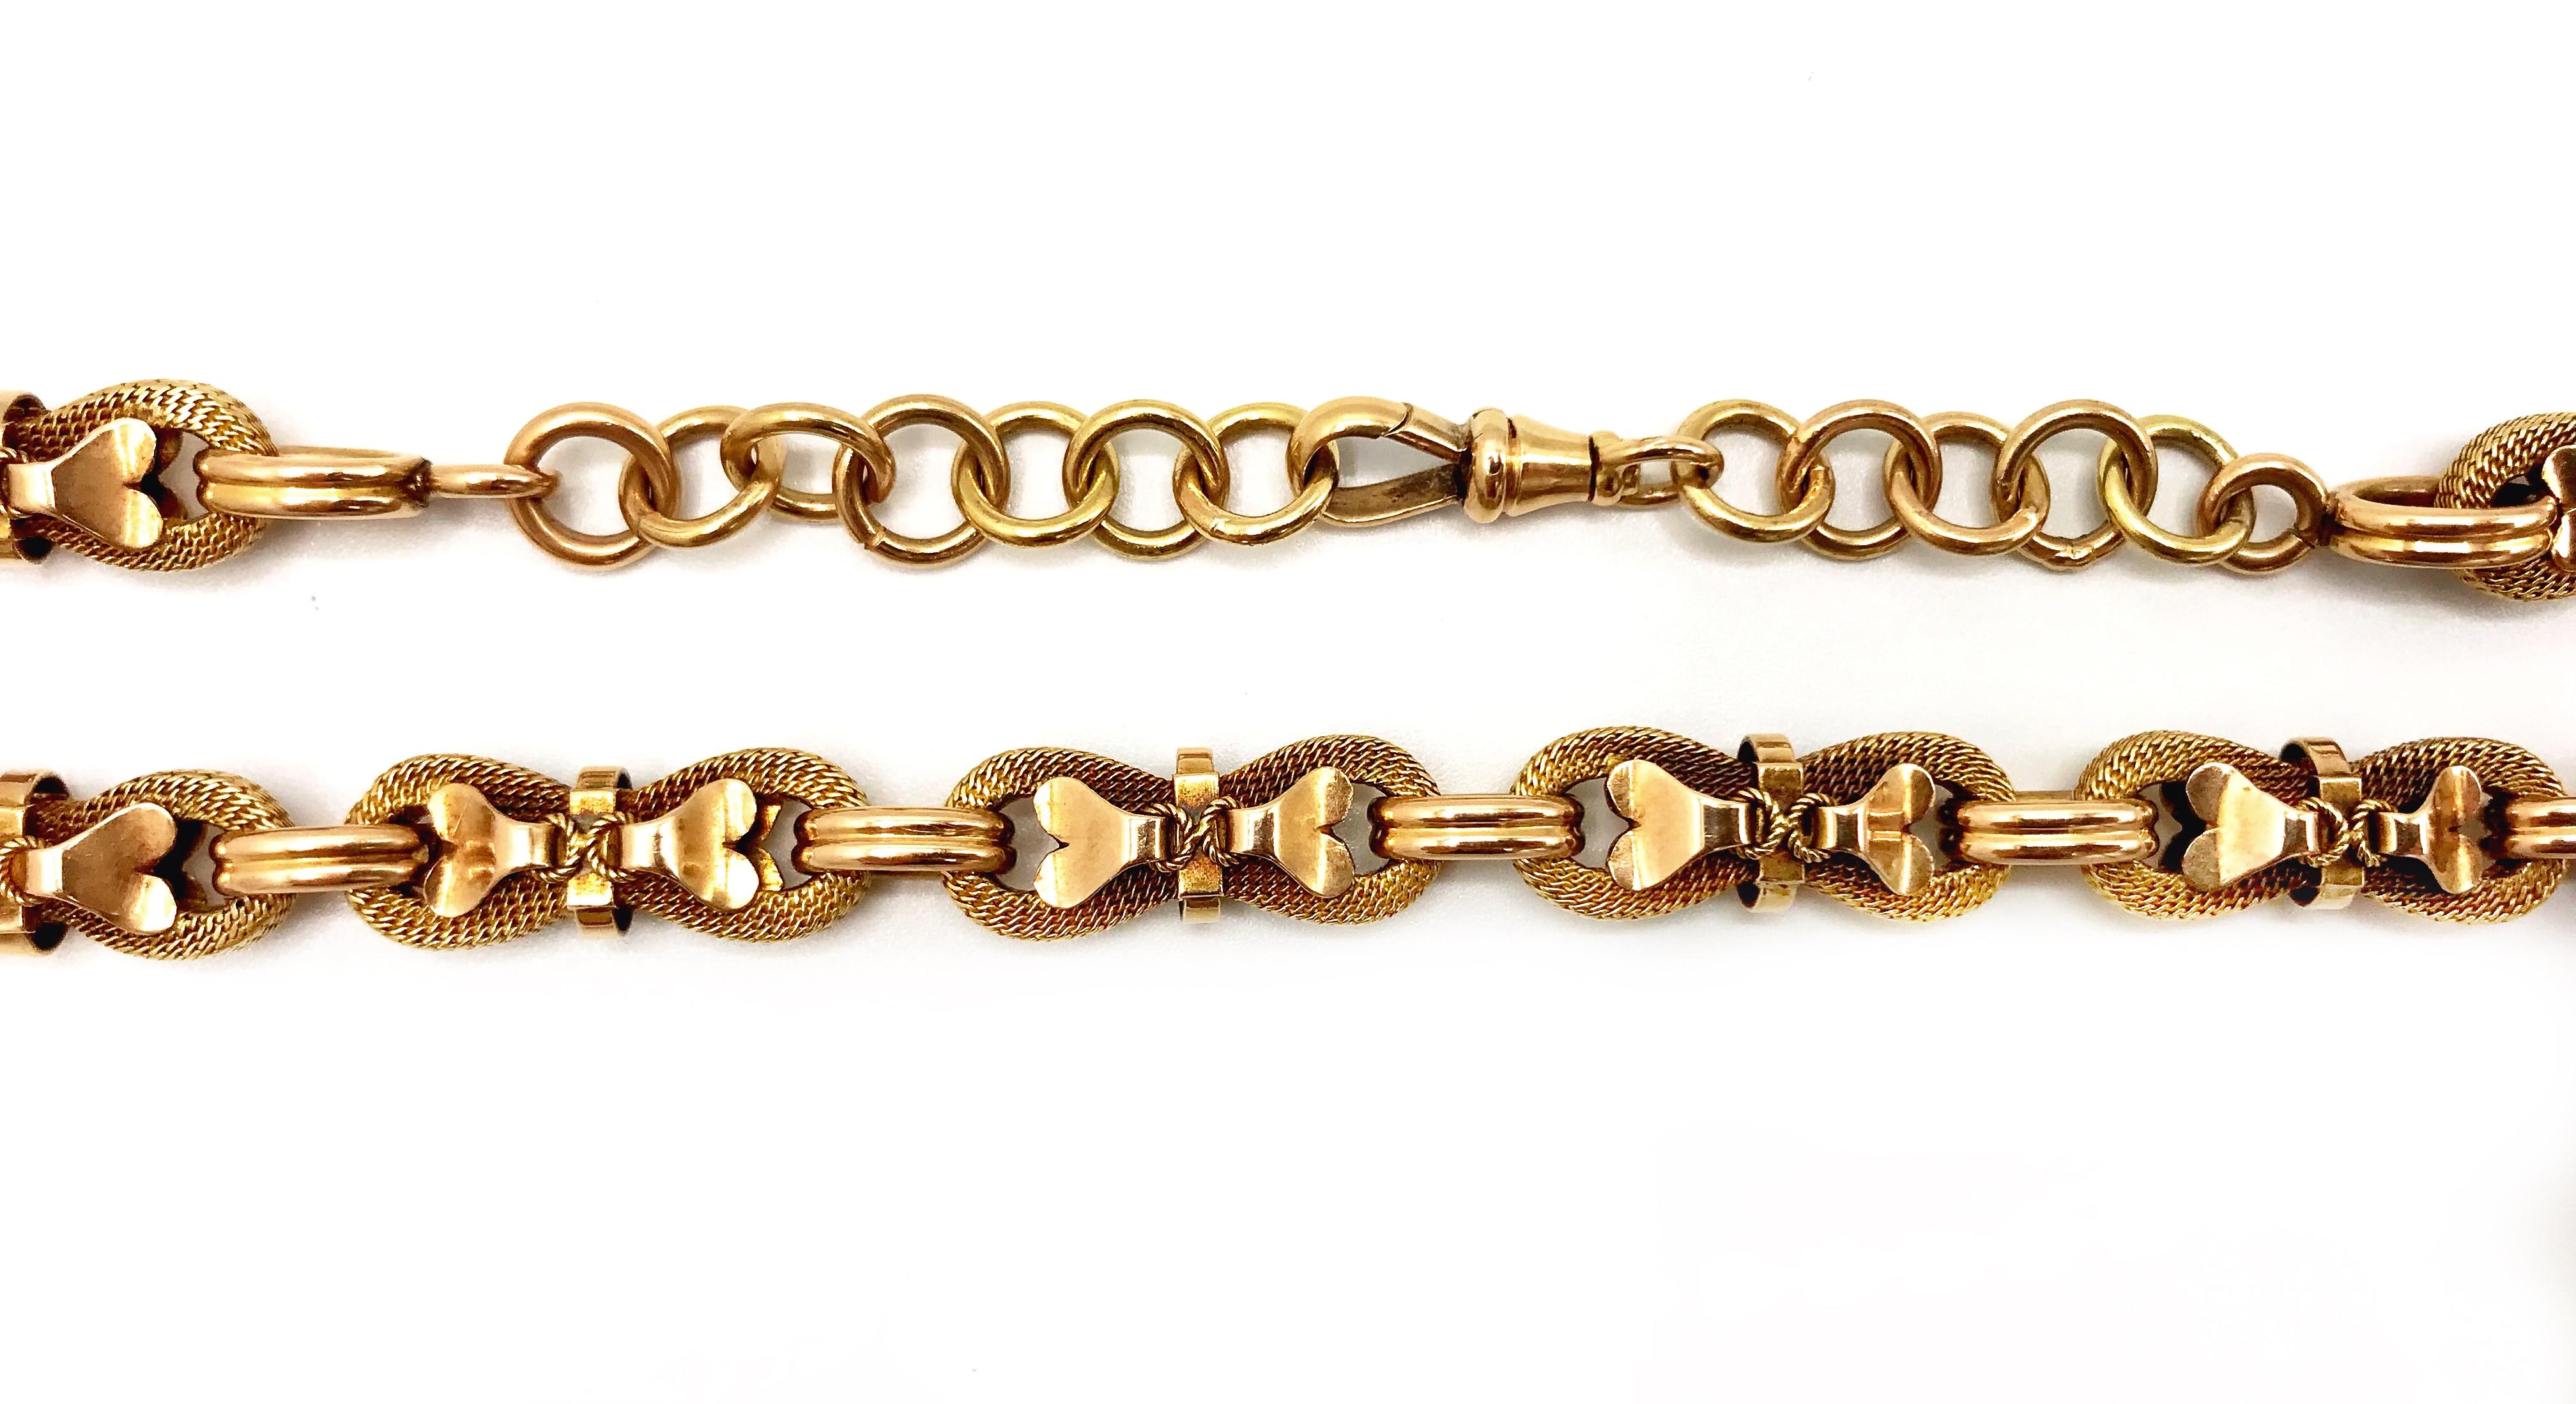 Gorgeous unusual Antique watch chain necklace made of 18k yellow gold. Extension (the top part with a clasp) was added later and is made of 14k gold. 
Links are consist of braided 